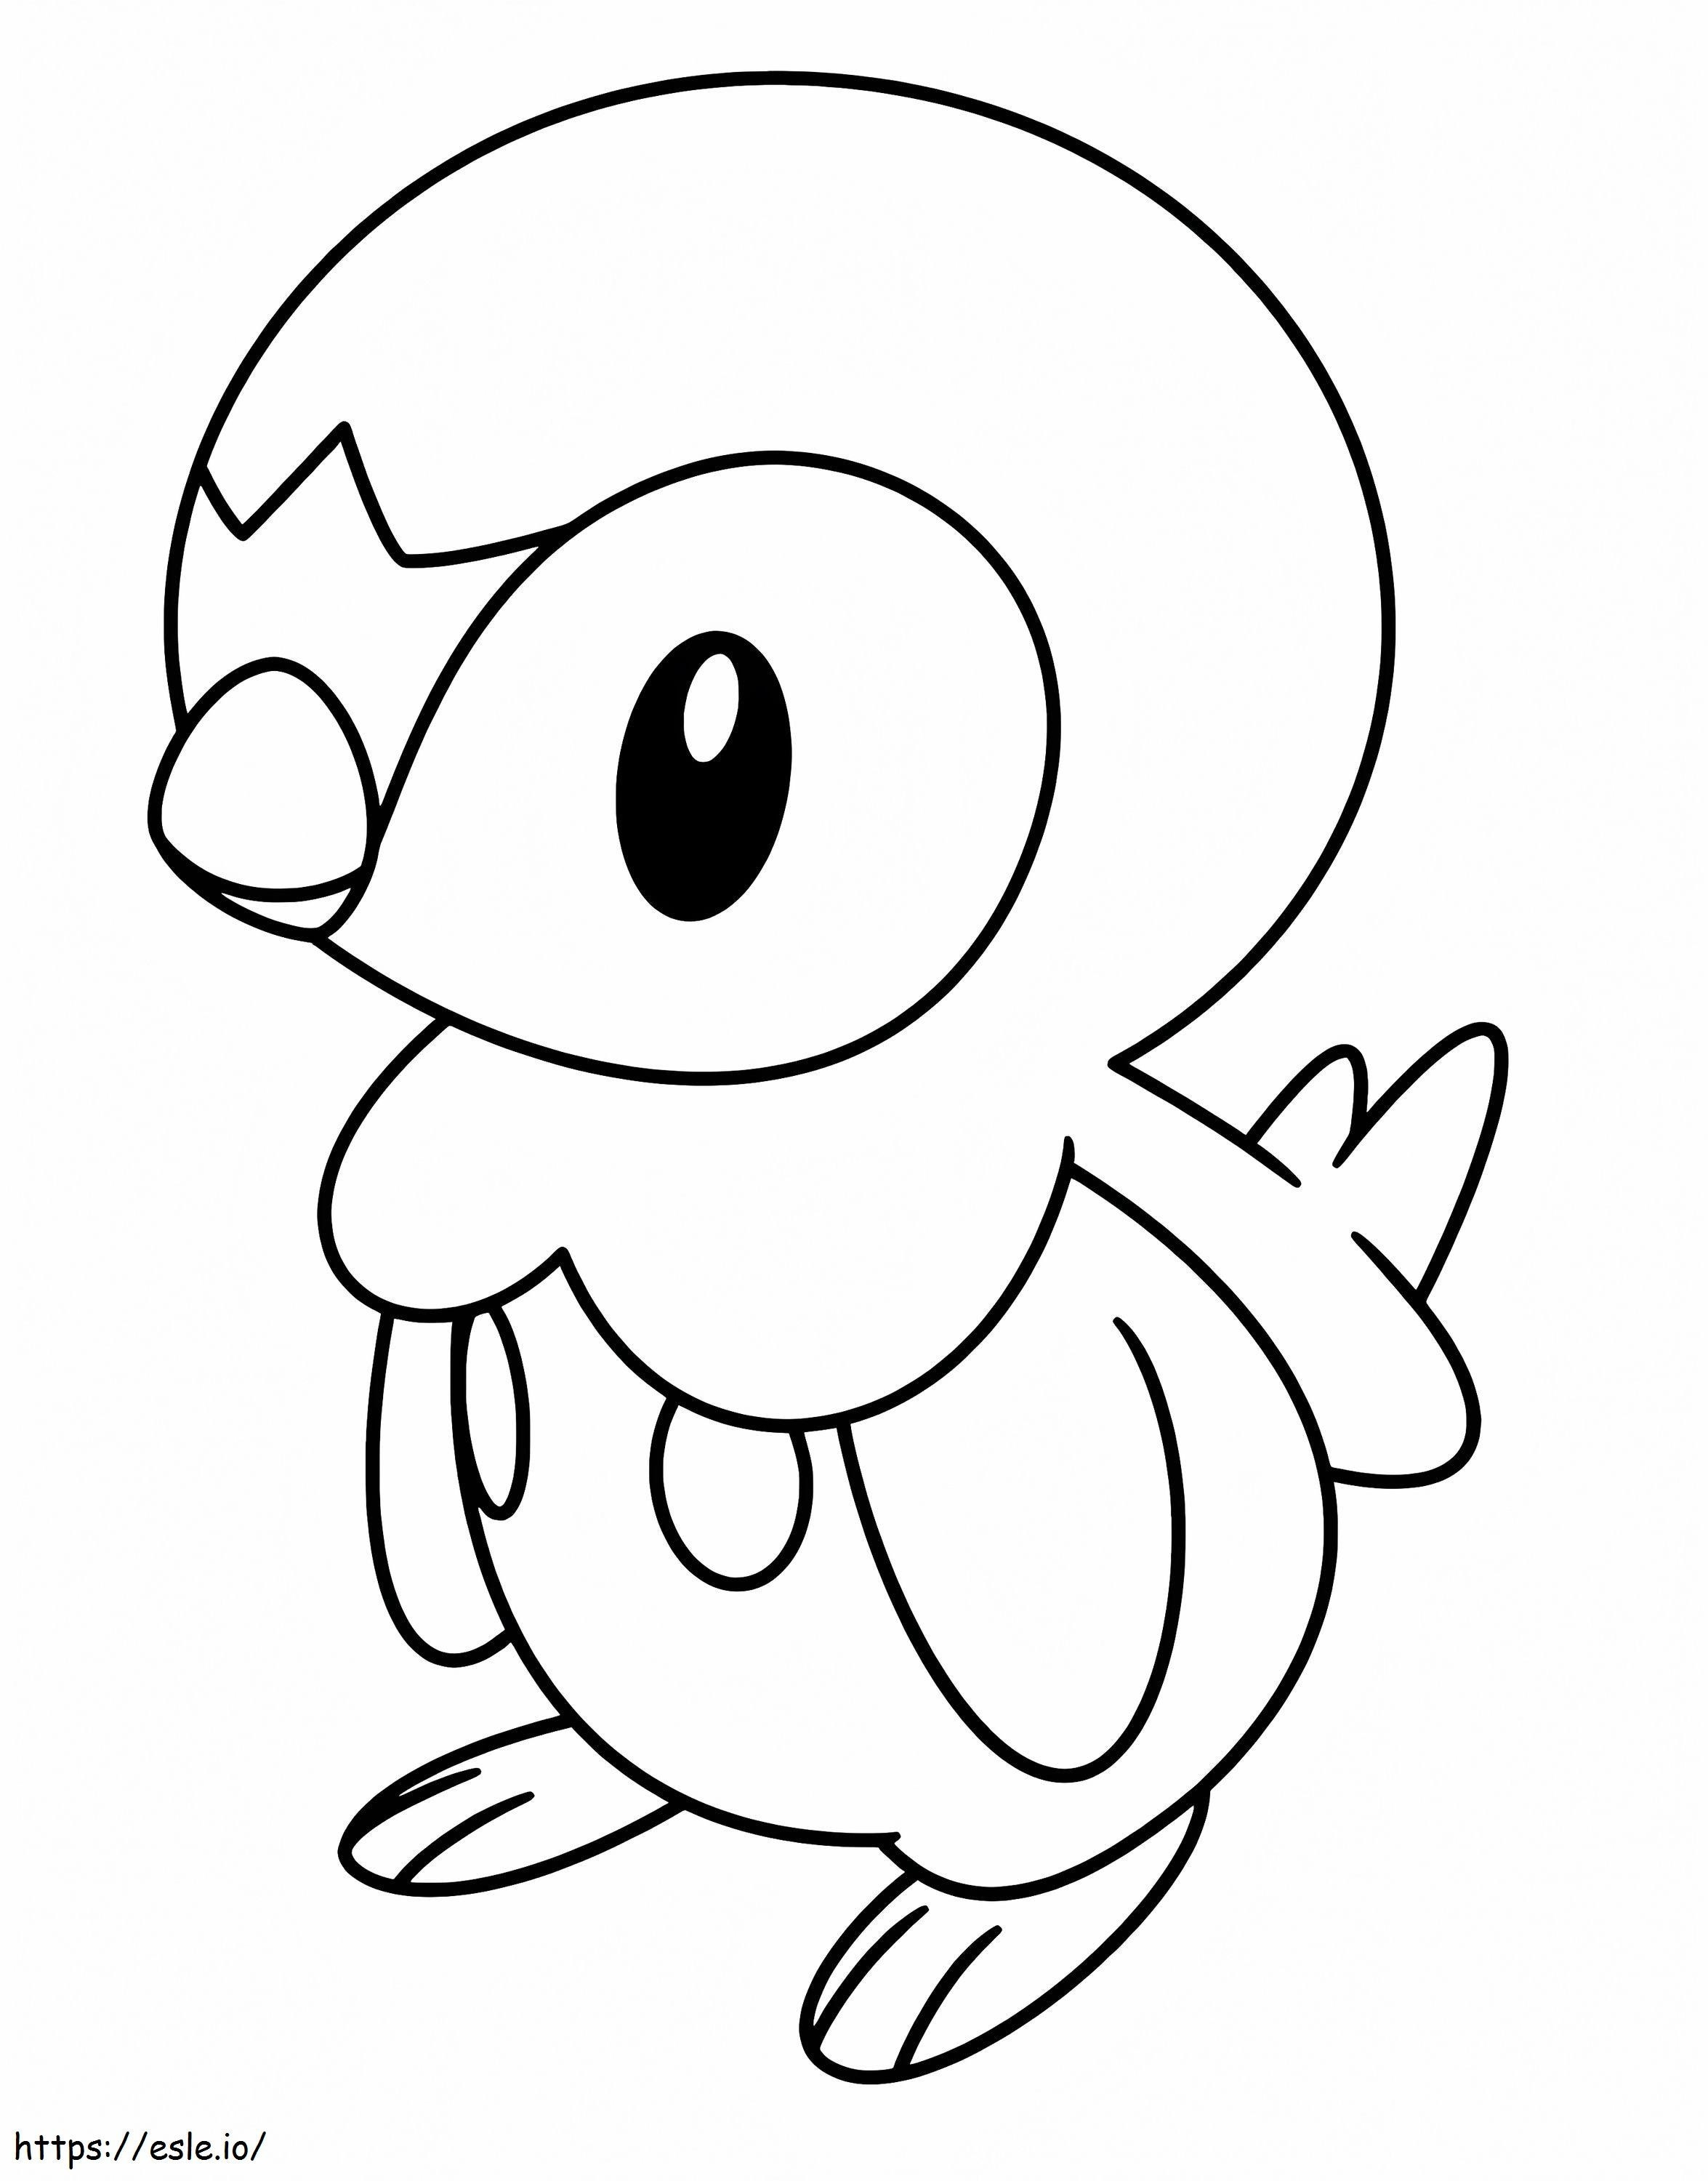 Cute Piplup coloring page